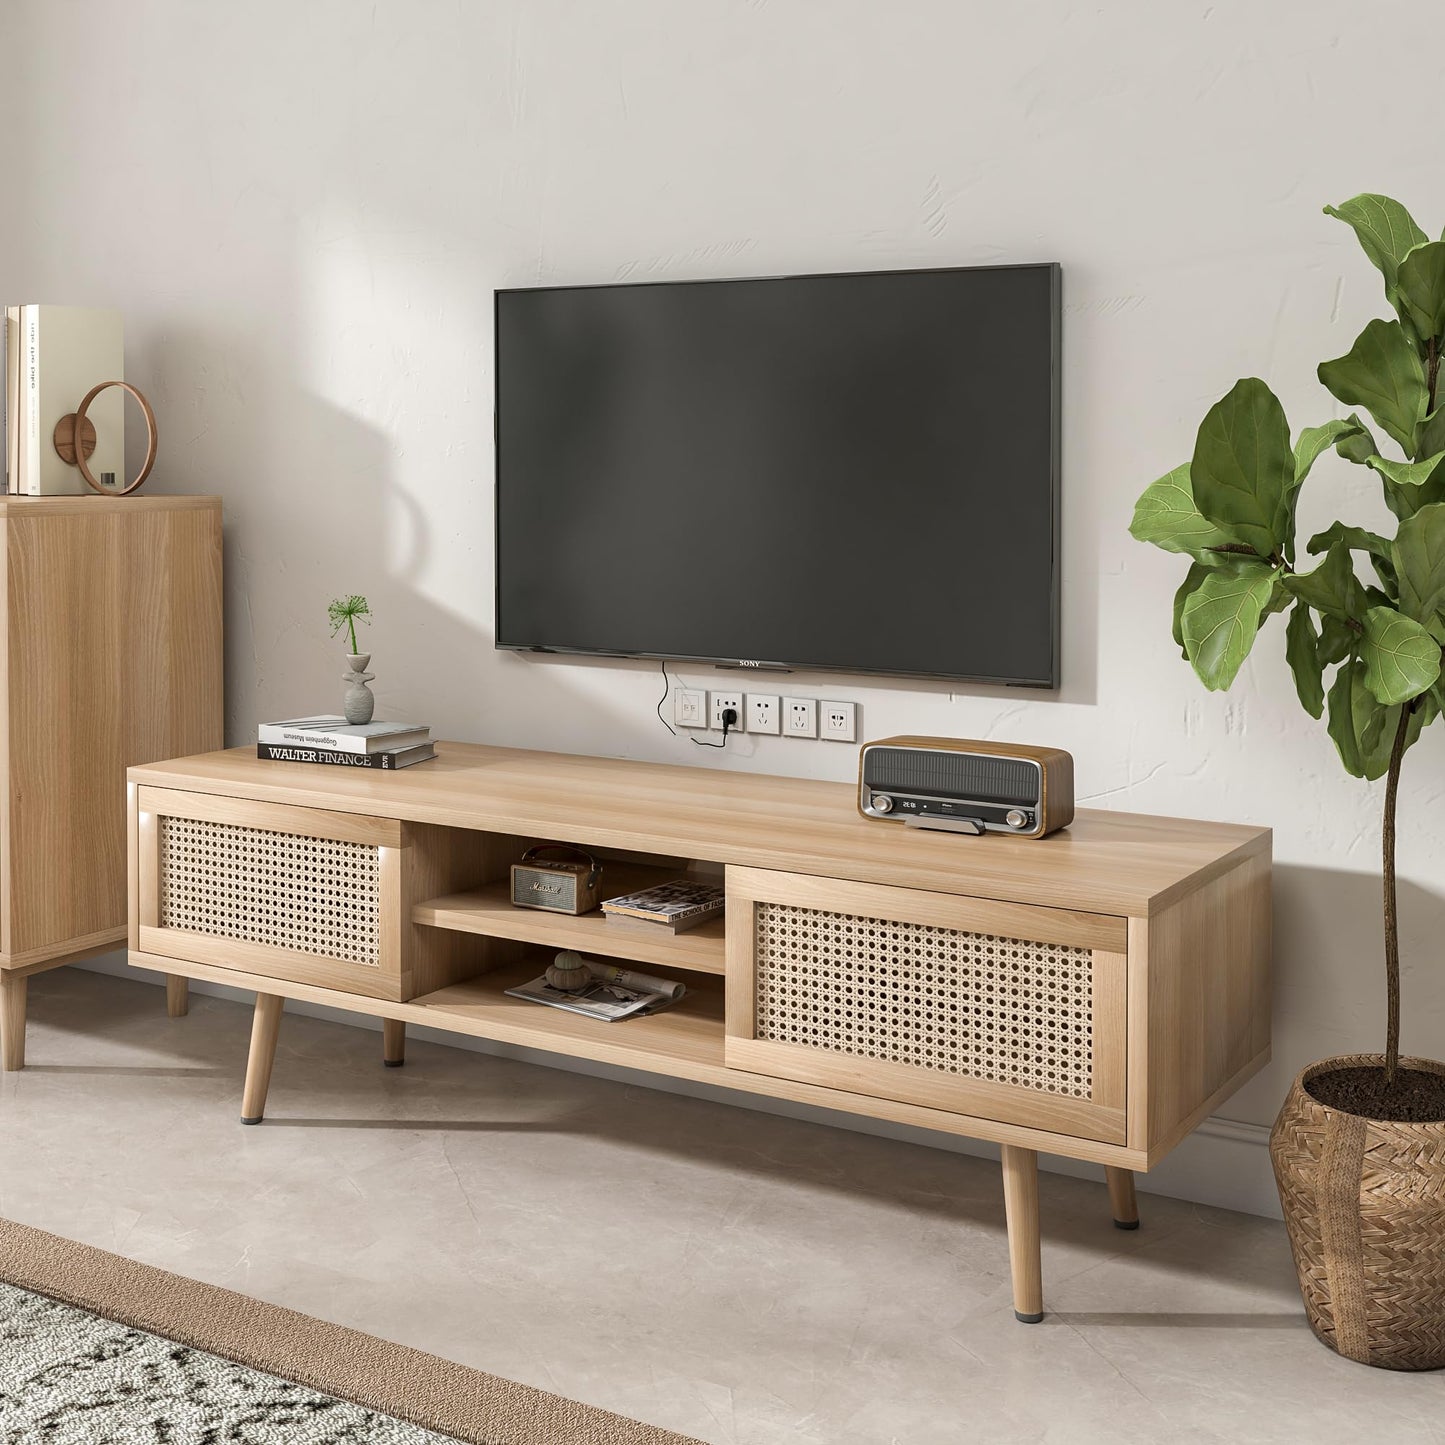 LUCKYELF Rattan TV Stand for 55 Inch TV Boho Farmhouse TV Console Media Cabinet with Solid Wood Legs Television Stands TV Cabinet Double Sliding